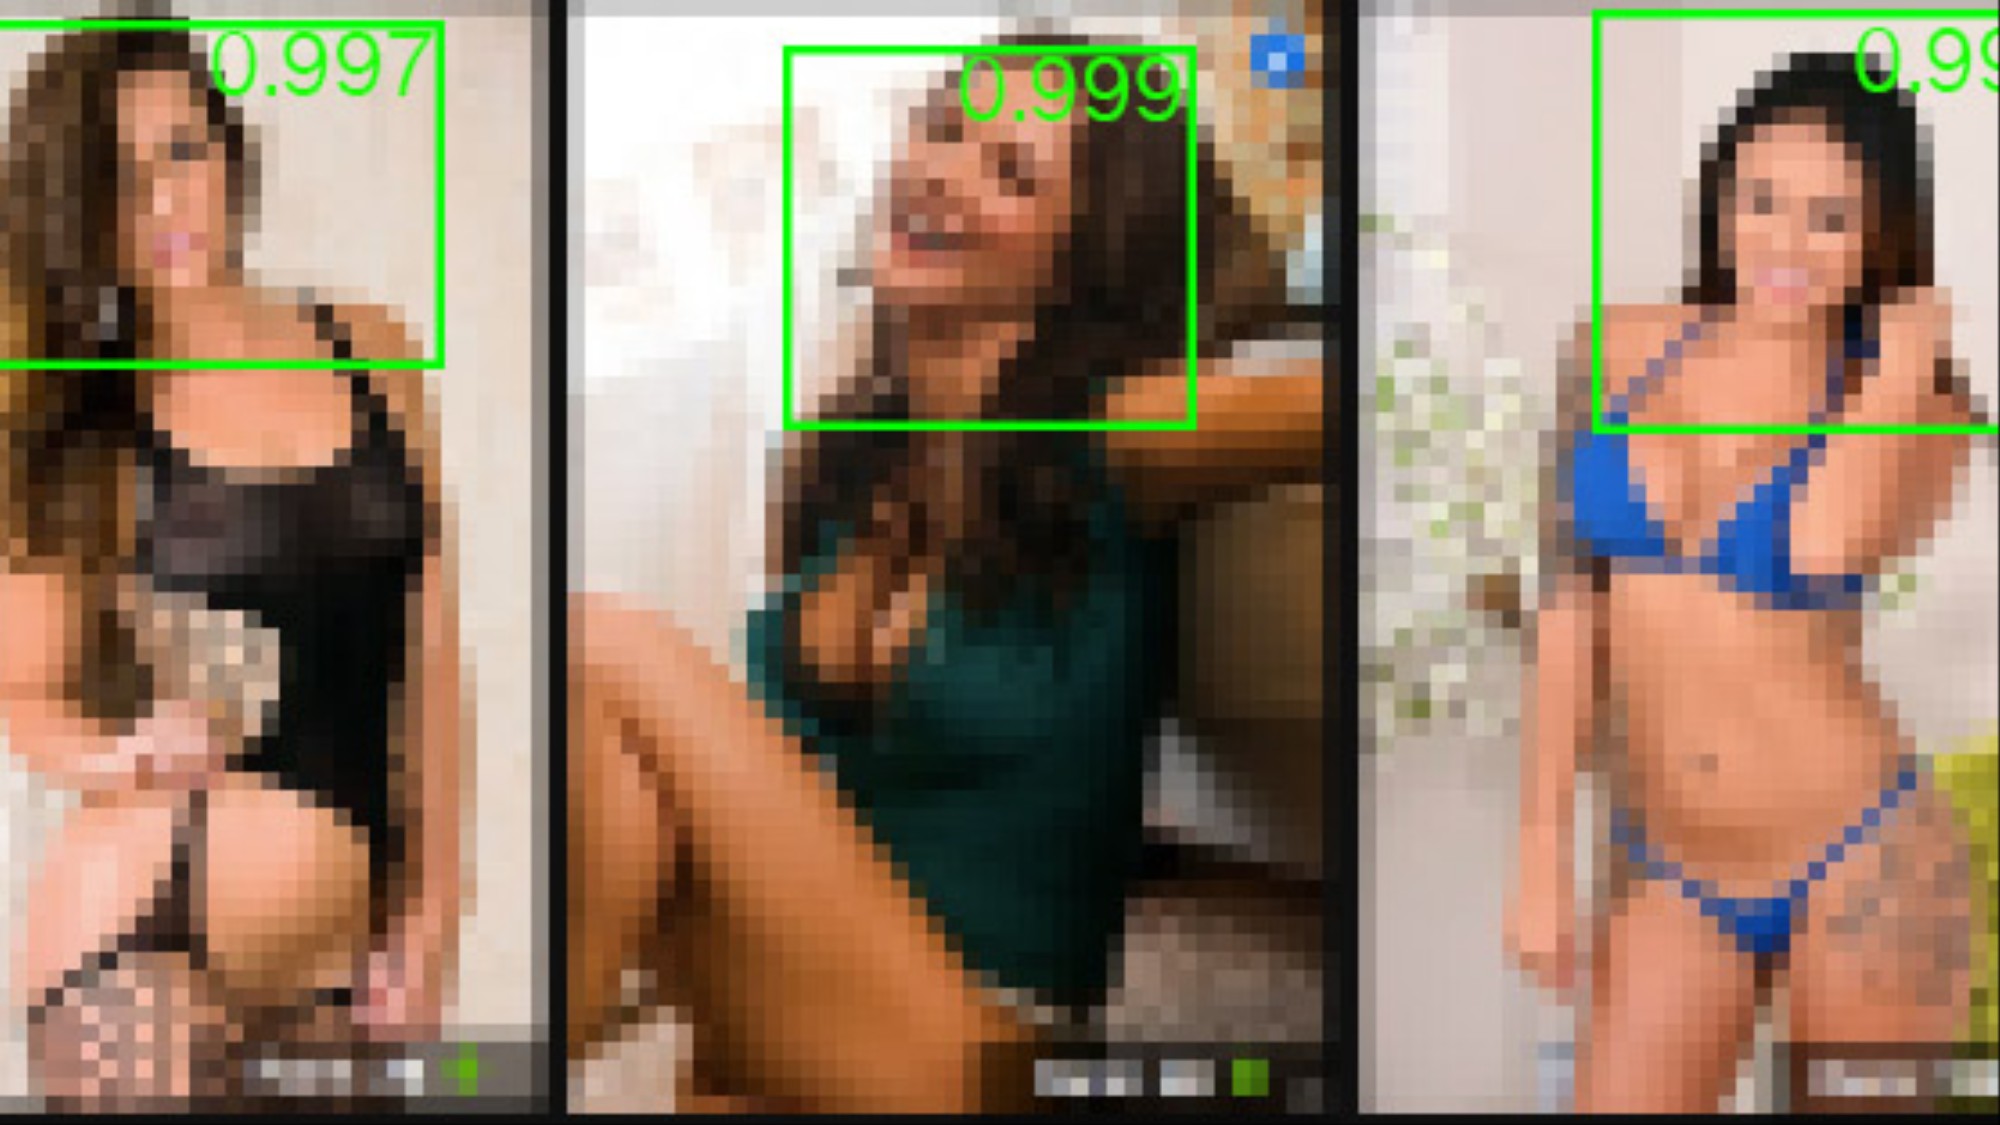 Porn Stars With Last Name Brown - Facial Recognition for Porn Stars Is a Privacy Nightmare ...